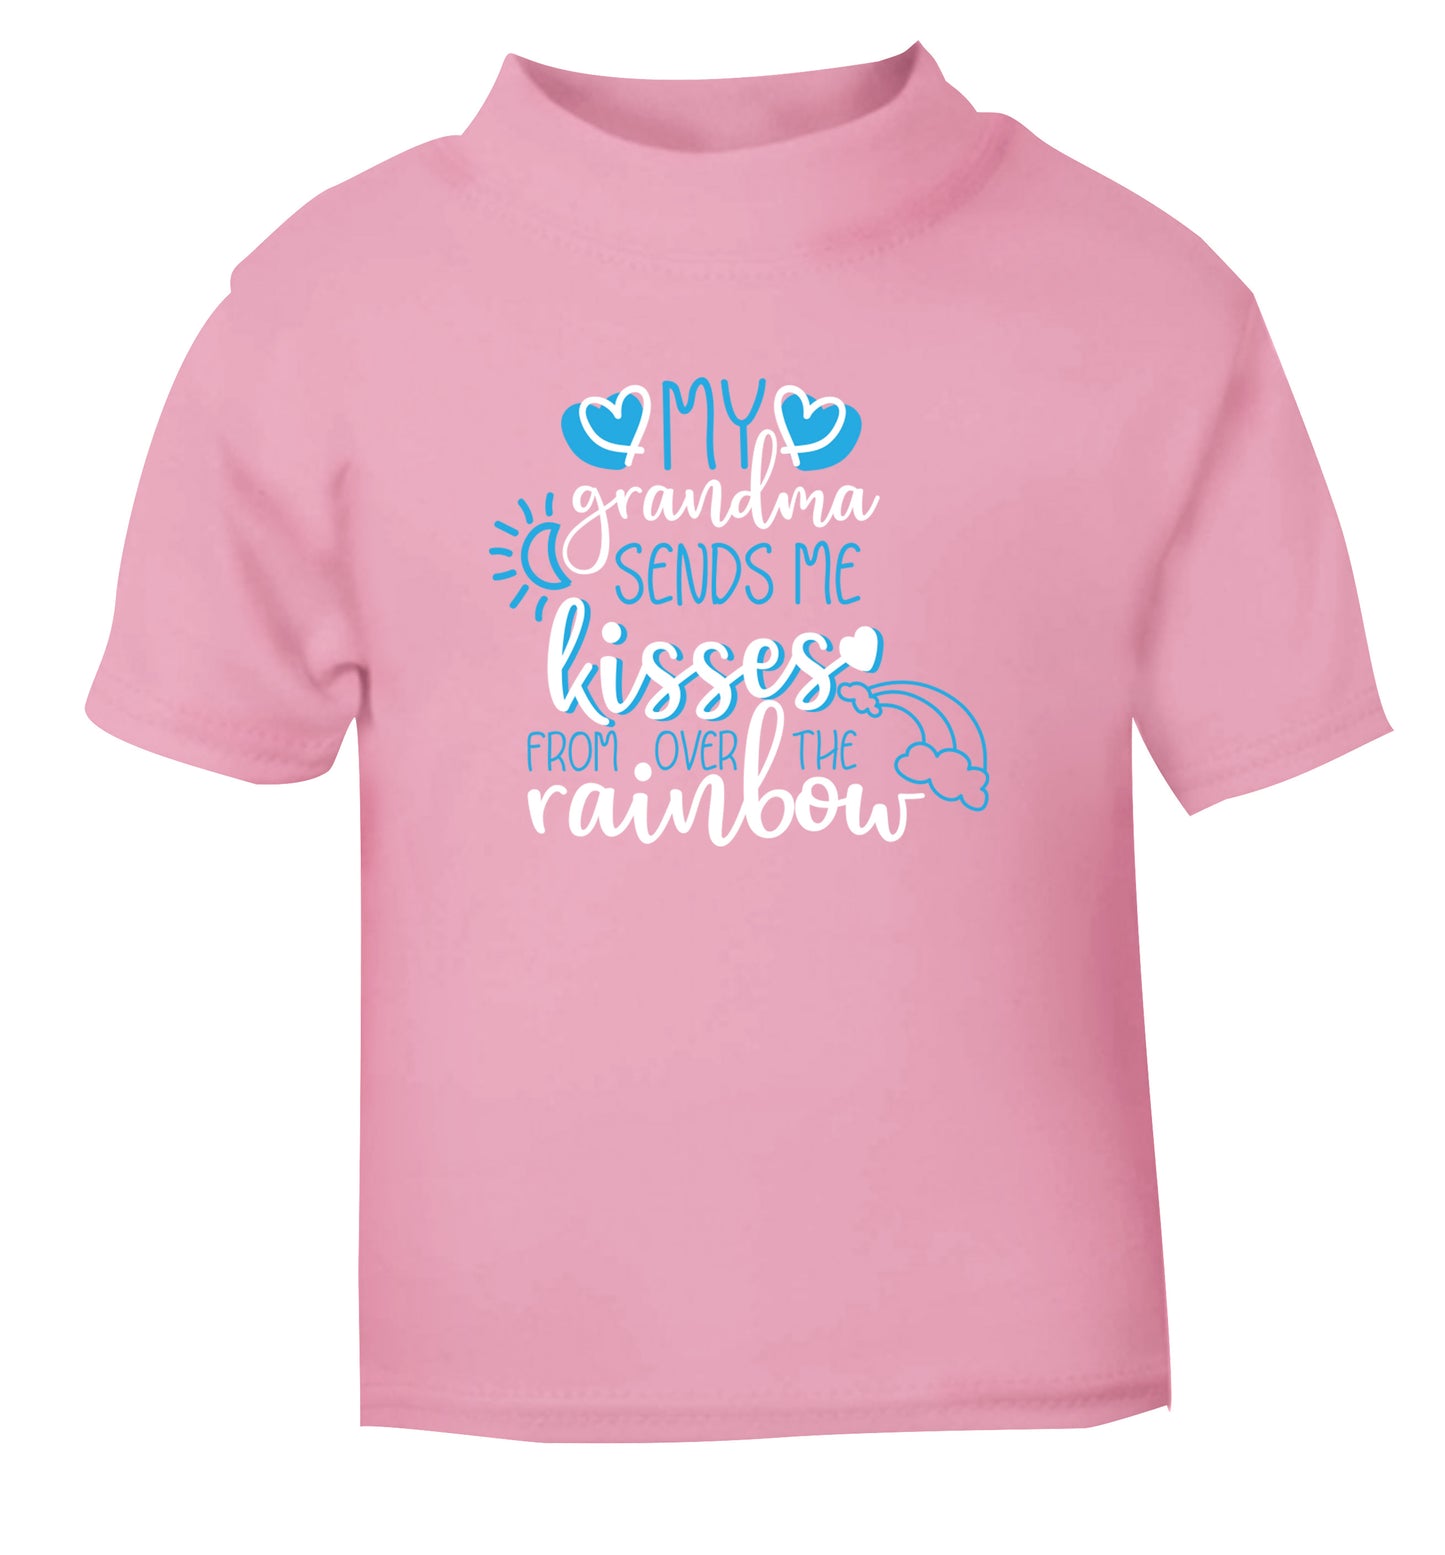 My grandma sends me kisses from over the rainbow light pink Baby Toddler Tshirt 2 Years